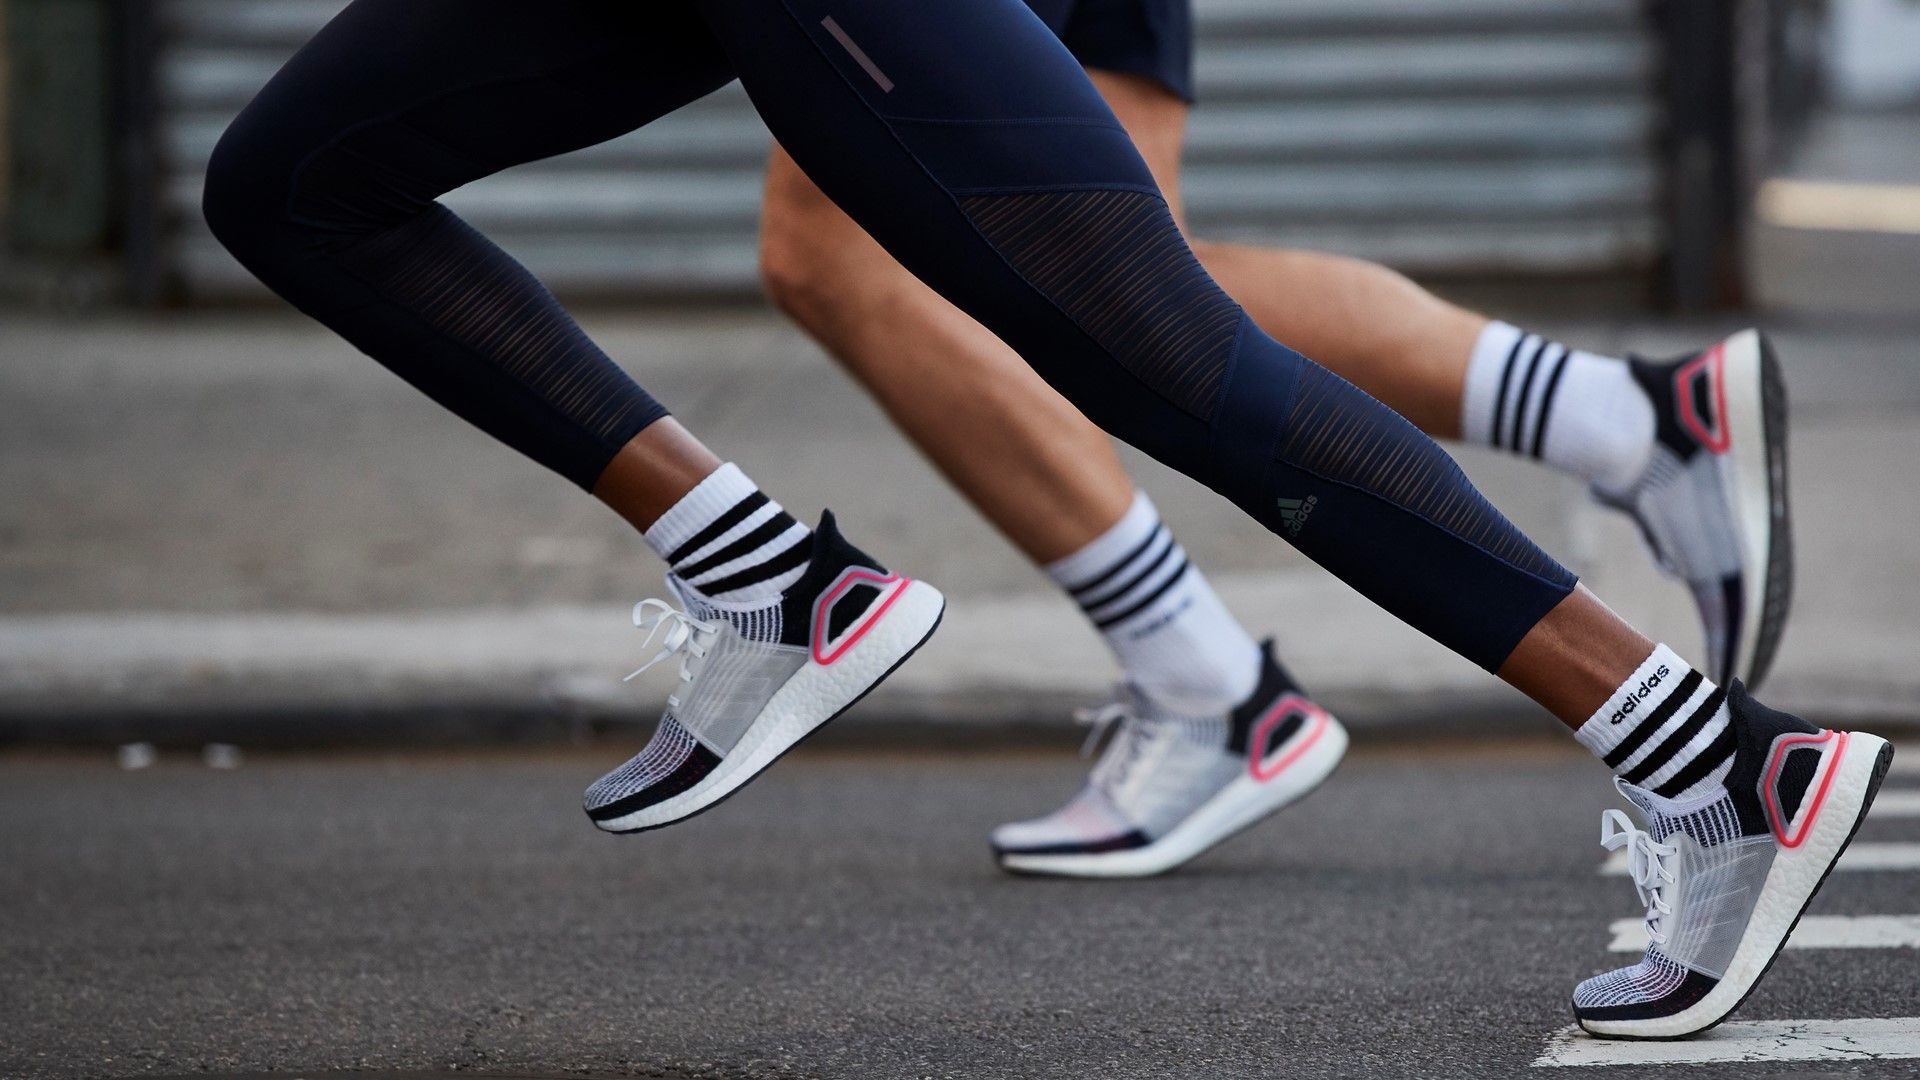 Ethical running shoes to get your workout off on the right foot